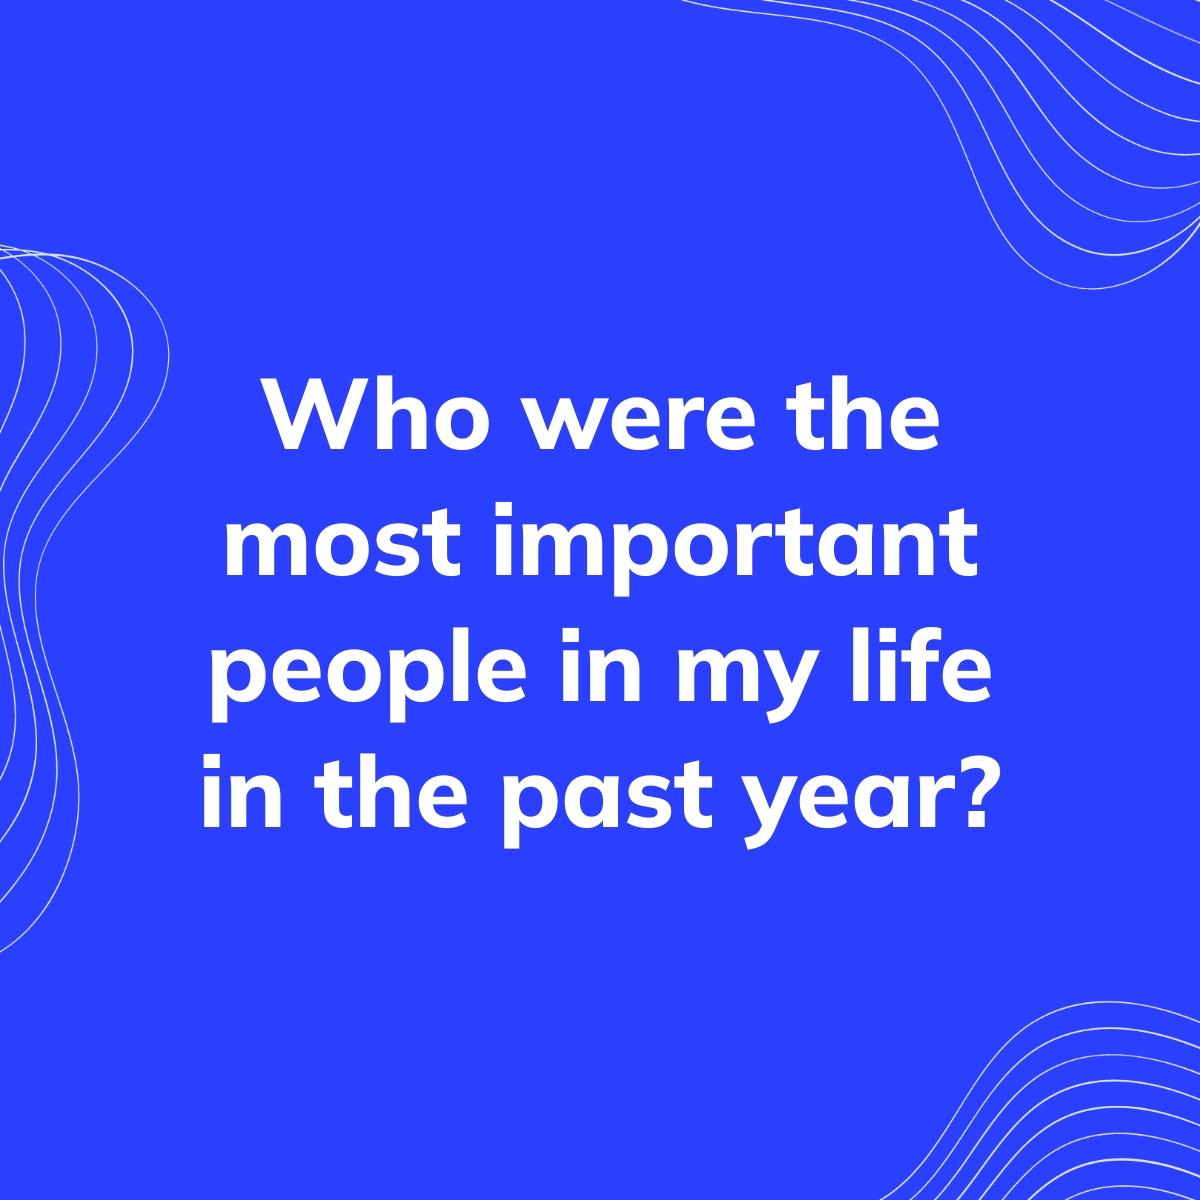 Journal Prompt: Who were the most important people in my life in the past year?